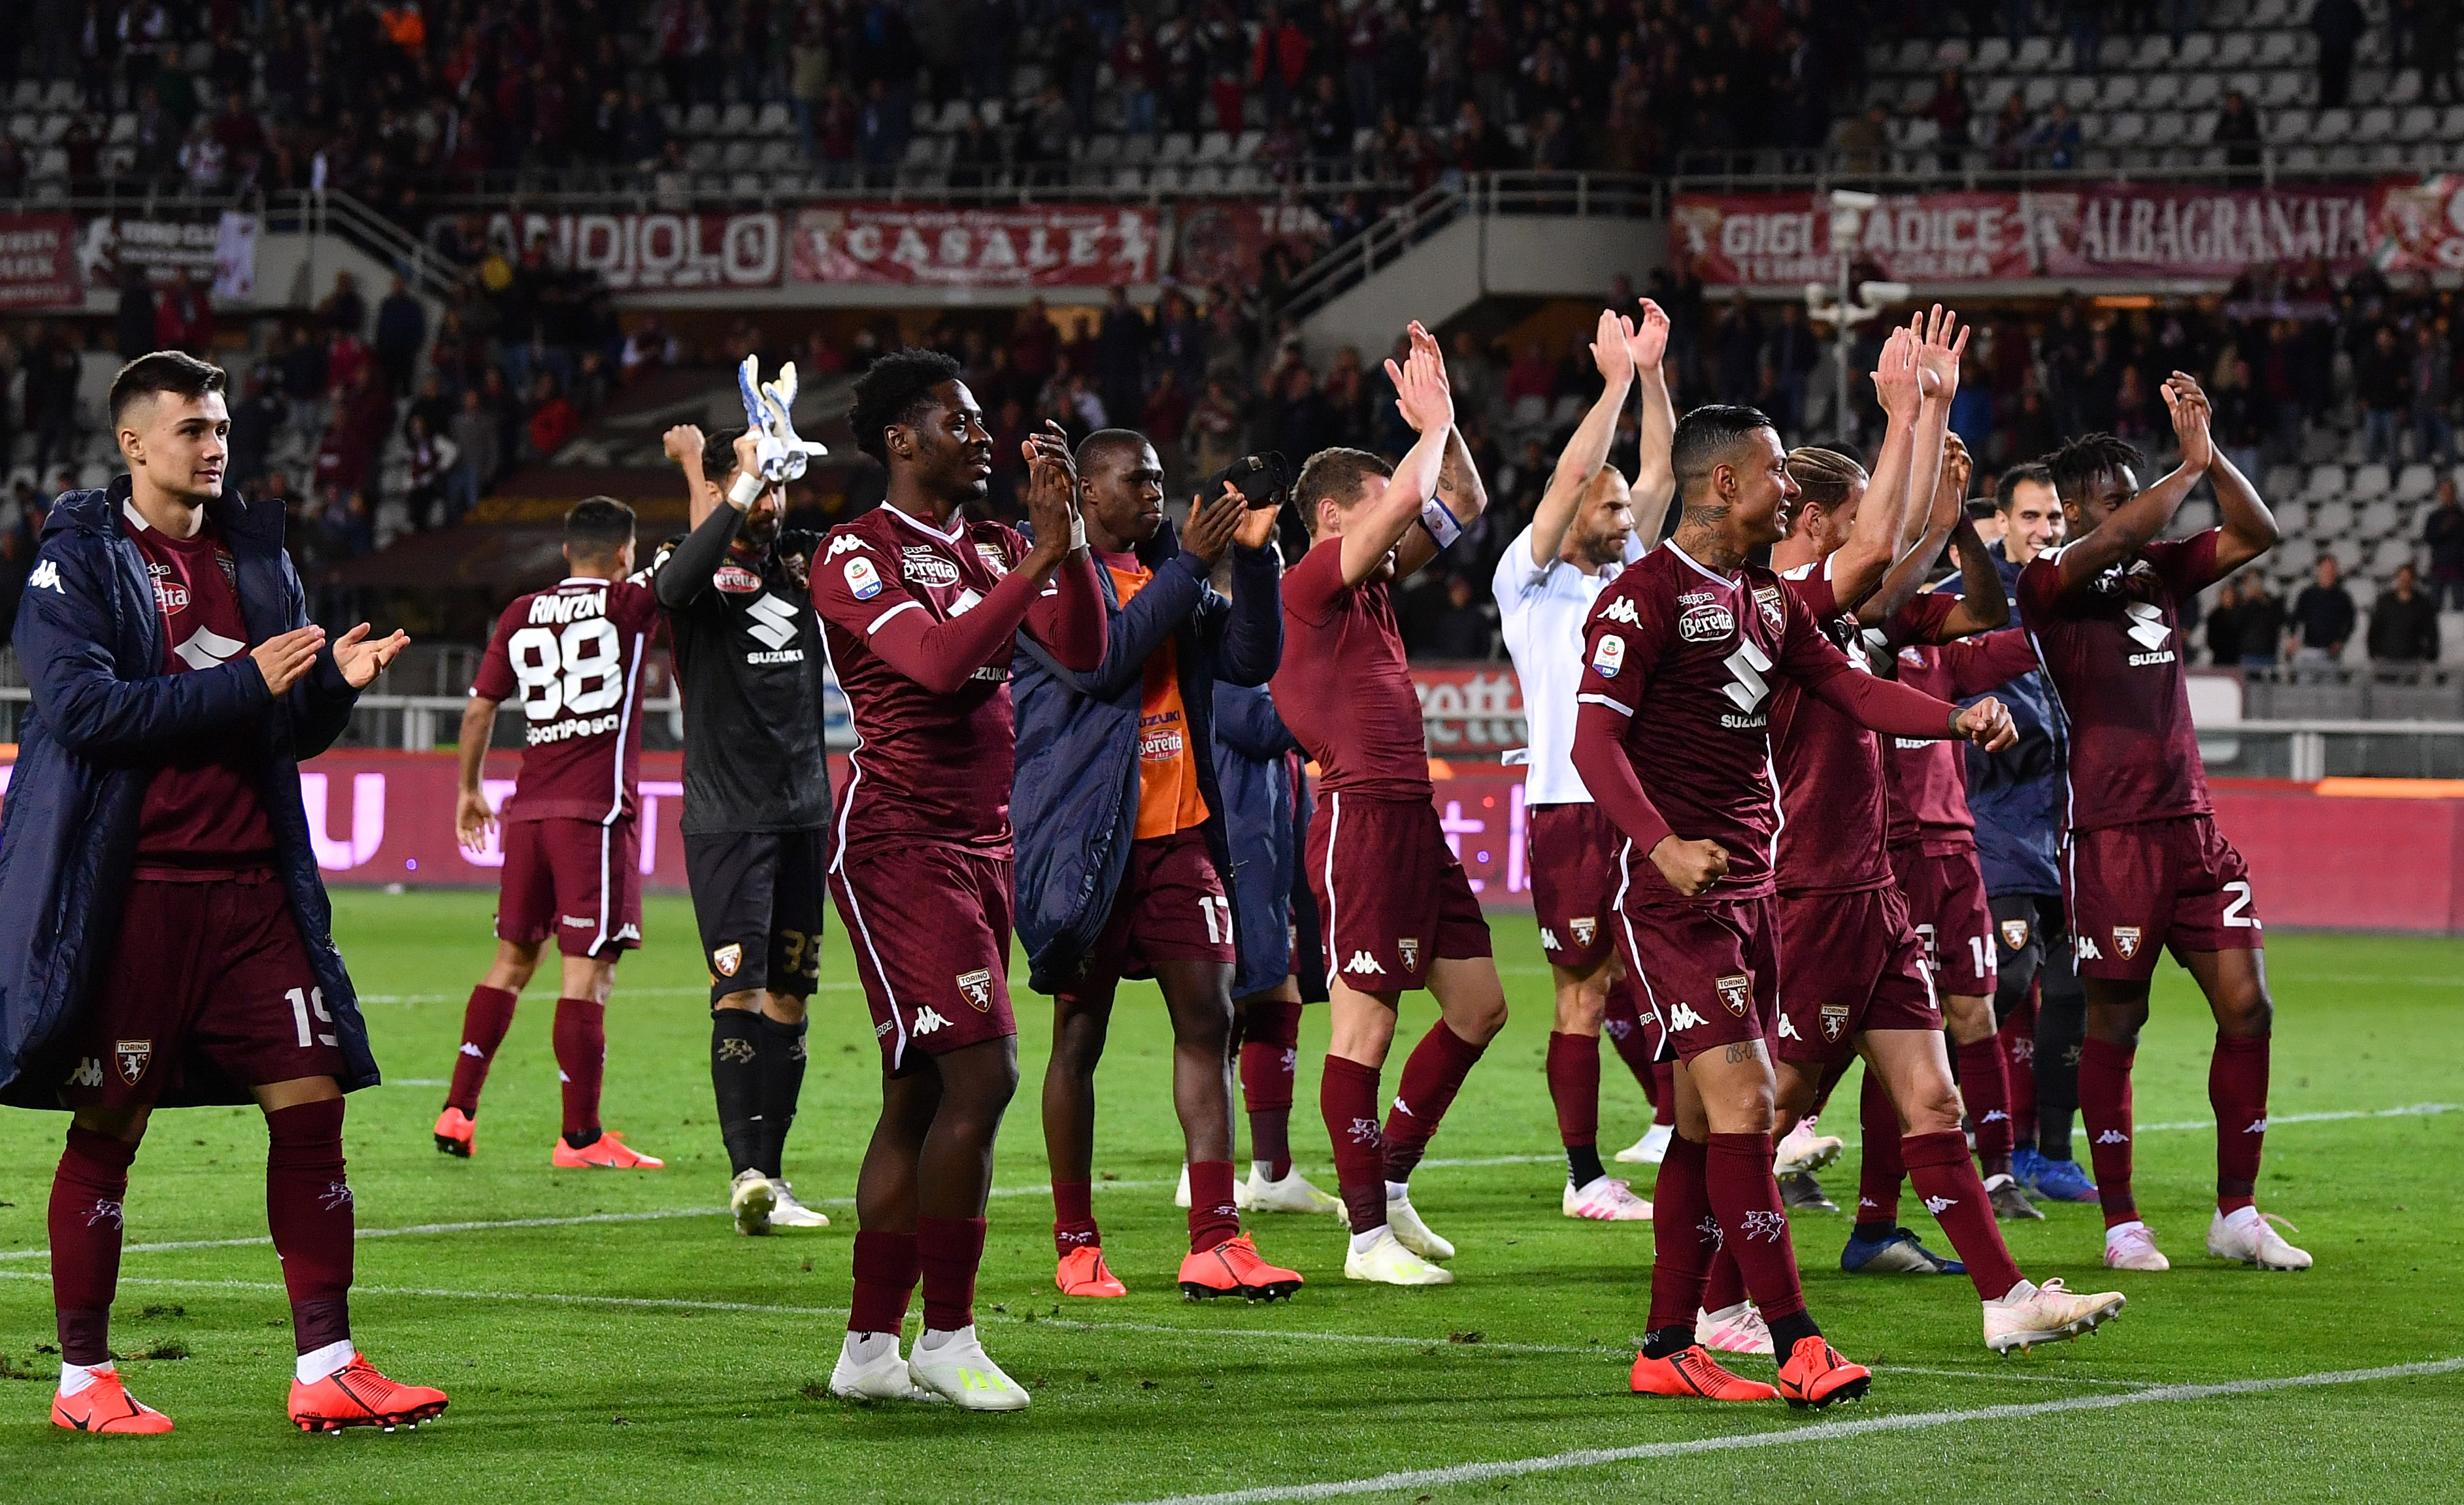 TURIN, ITALY - APRIL 28:  Team of Torino FC celebrate victory at the end of the Serie A match between Torino FC and AC Milan at Stadio Olimpico di Torino on April 28, 2019 in Turin, Italy.  (Photo by Valerio Pennicino/Getty Images)